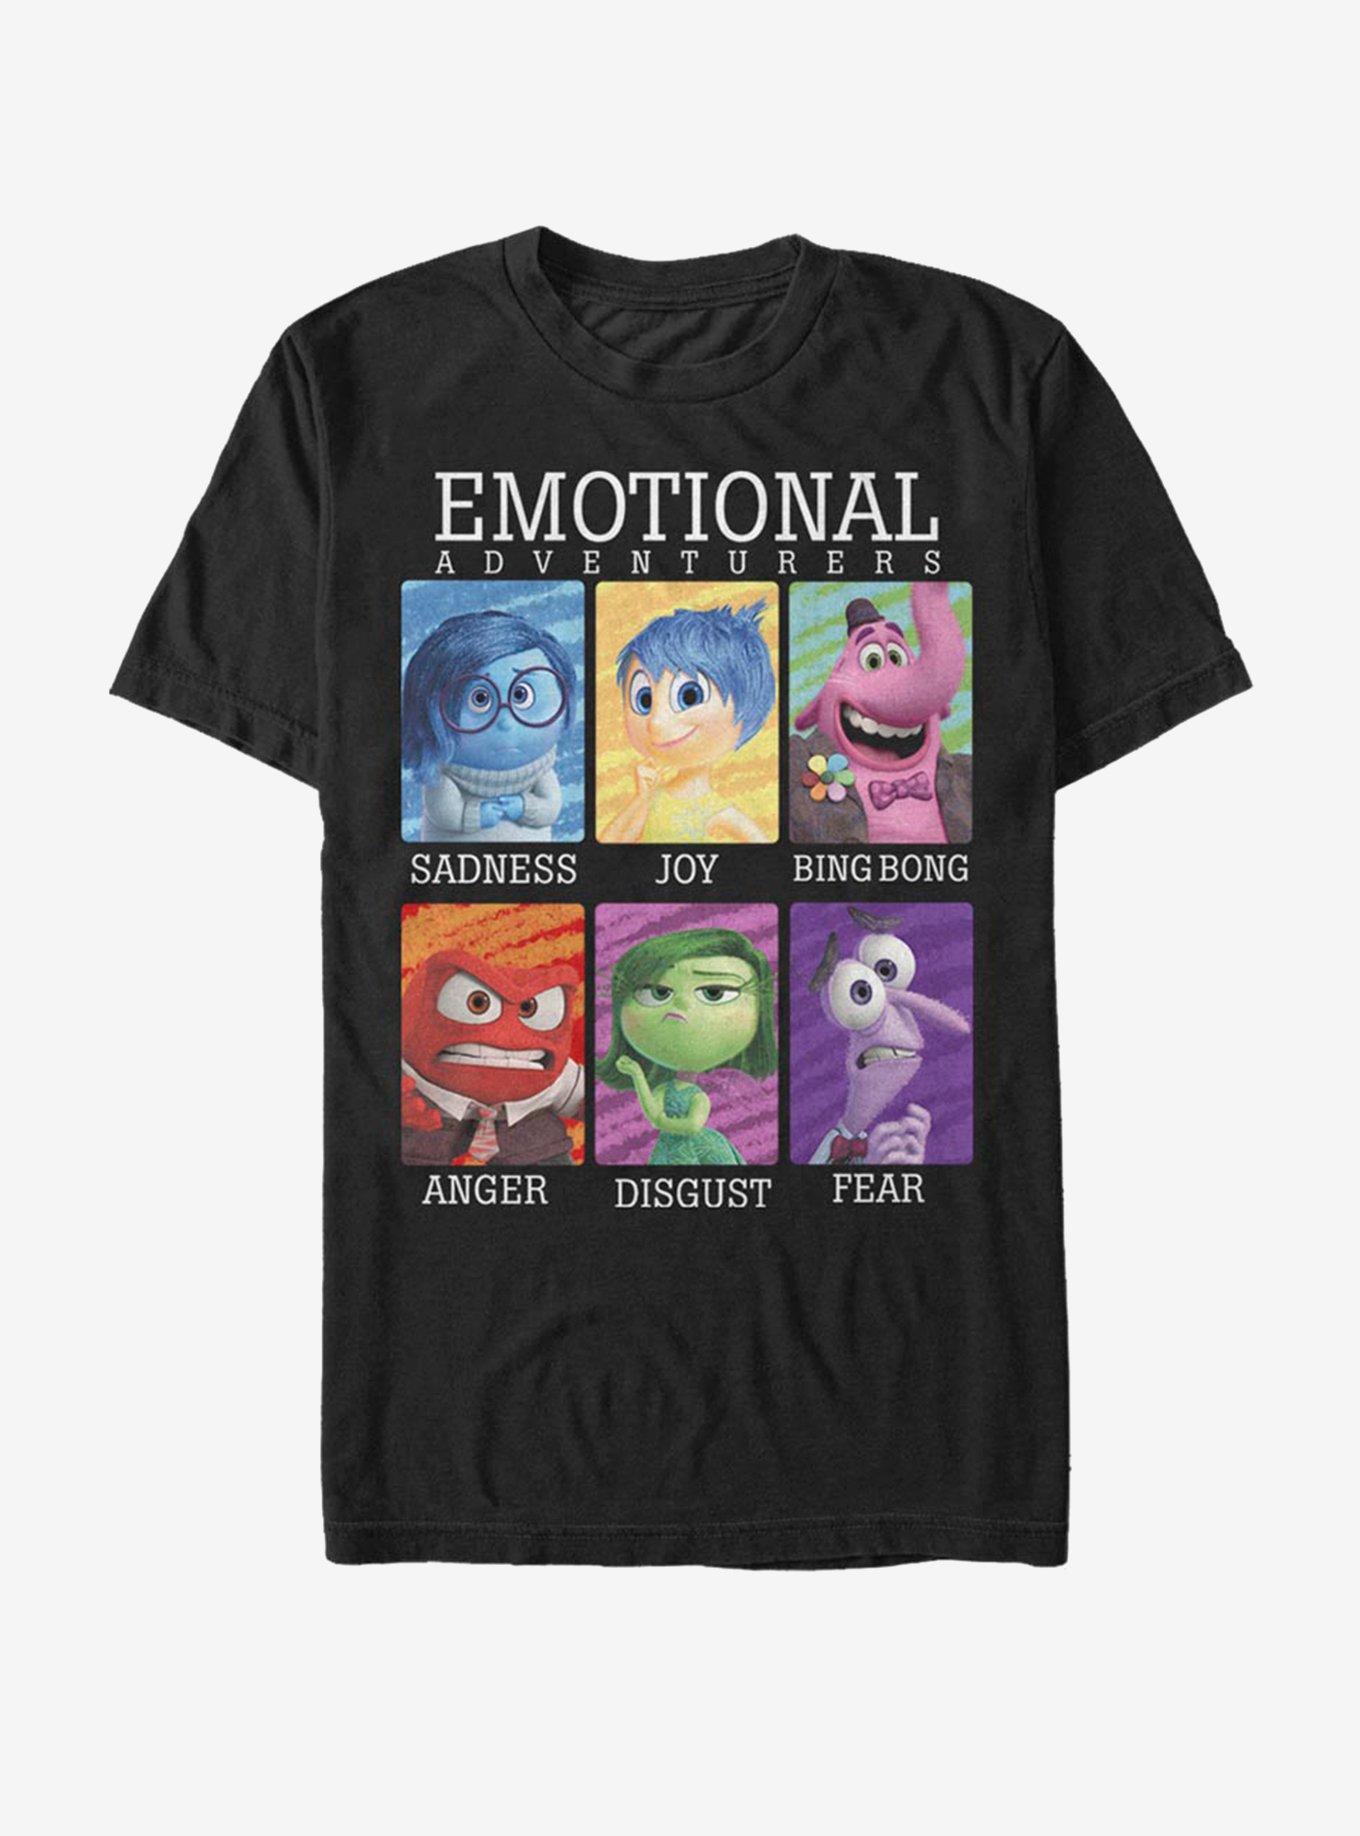 OFFICIAL Inside Out T-Shirts & Merchandise